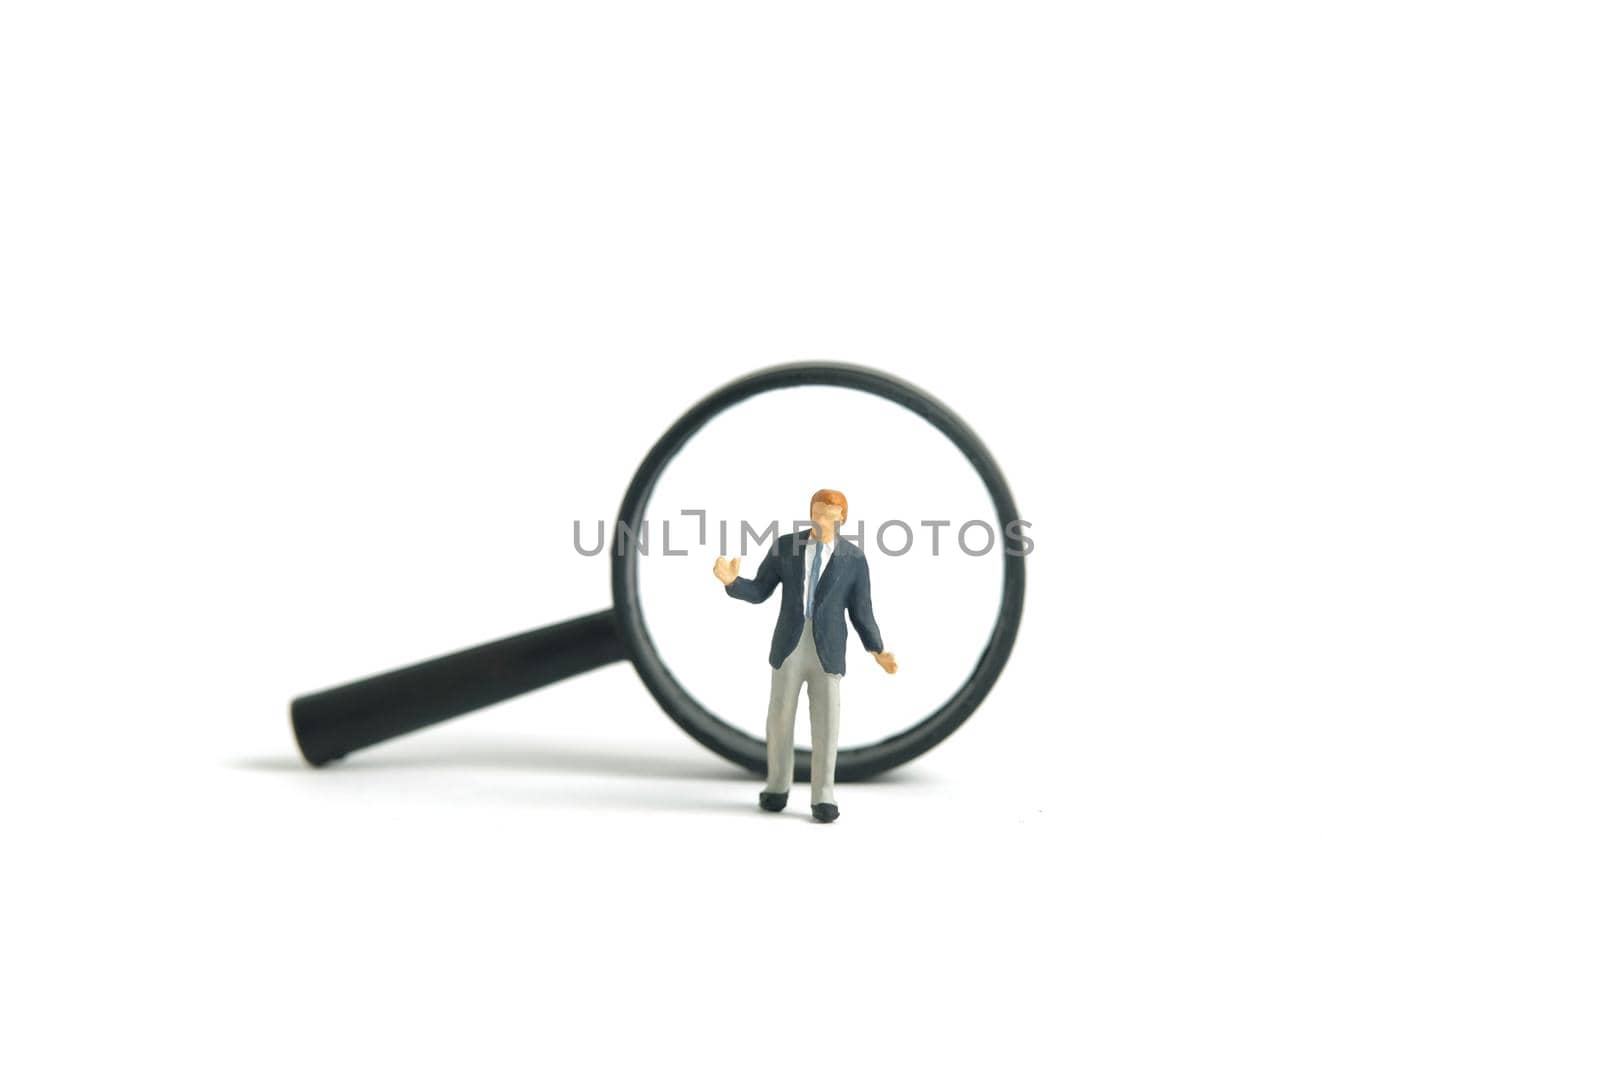 Miniature people toy figure photography. A shrugging businessman finding solution standing in front of magnifier glass. Isolated on white background. Image photo by Macrostud